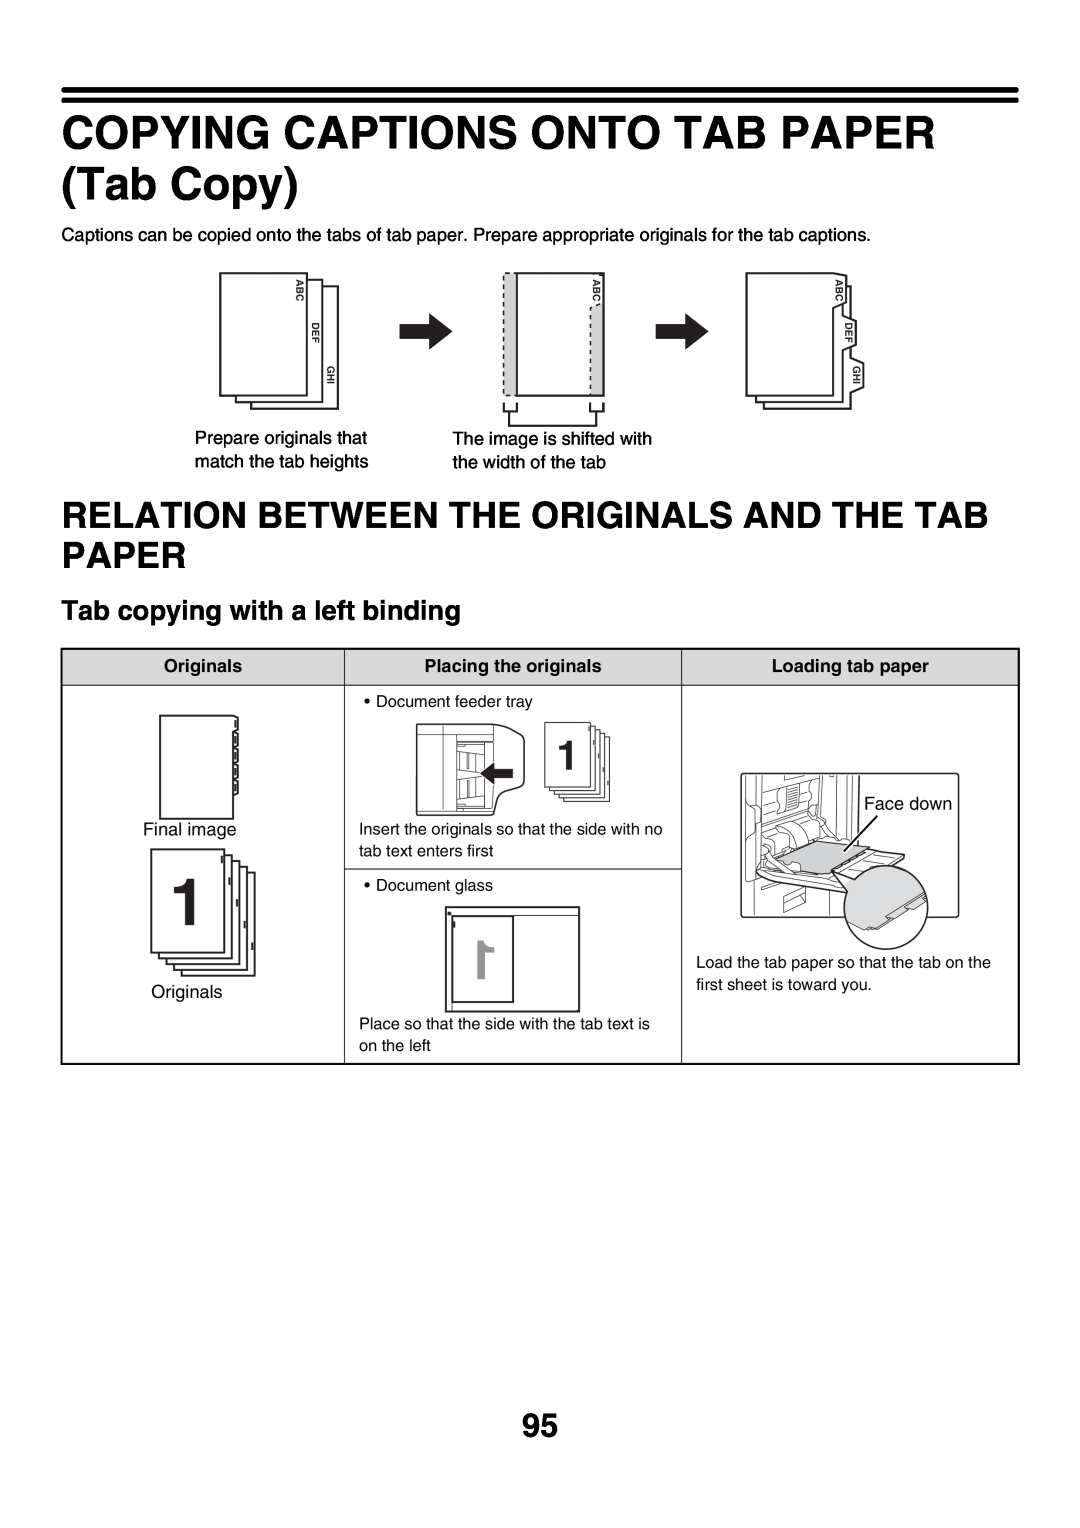 Sharp MX-4501N, MX-2700N manual COPYING CAPTIONS ONTO TAB PAPER Tab Copy, Relation Between The Originals And The Tab Paper 